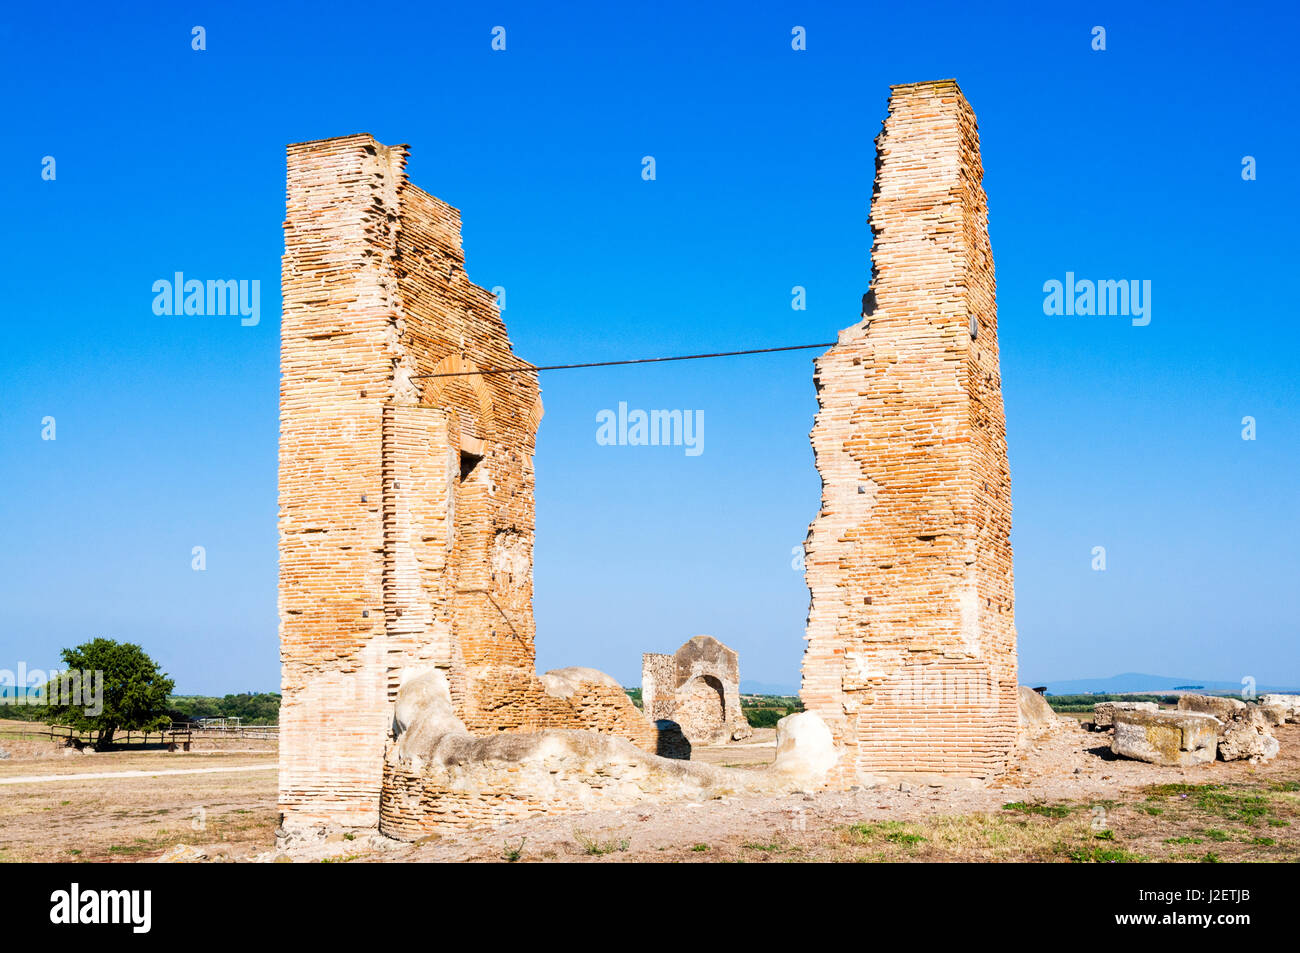 Thermal complex, Naturalistic archaeological park of Vulci, Etruscan City, Montalto di Castro, Province of Viterbo, Latium, Italy Stock Photo